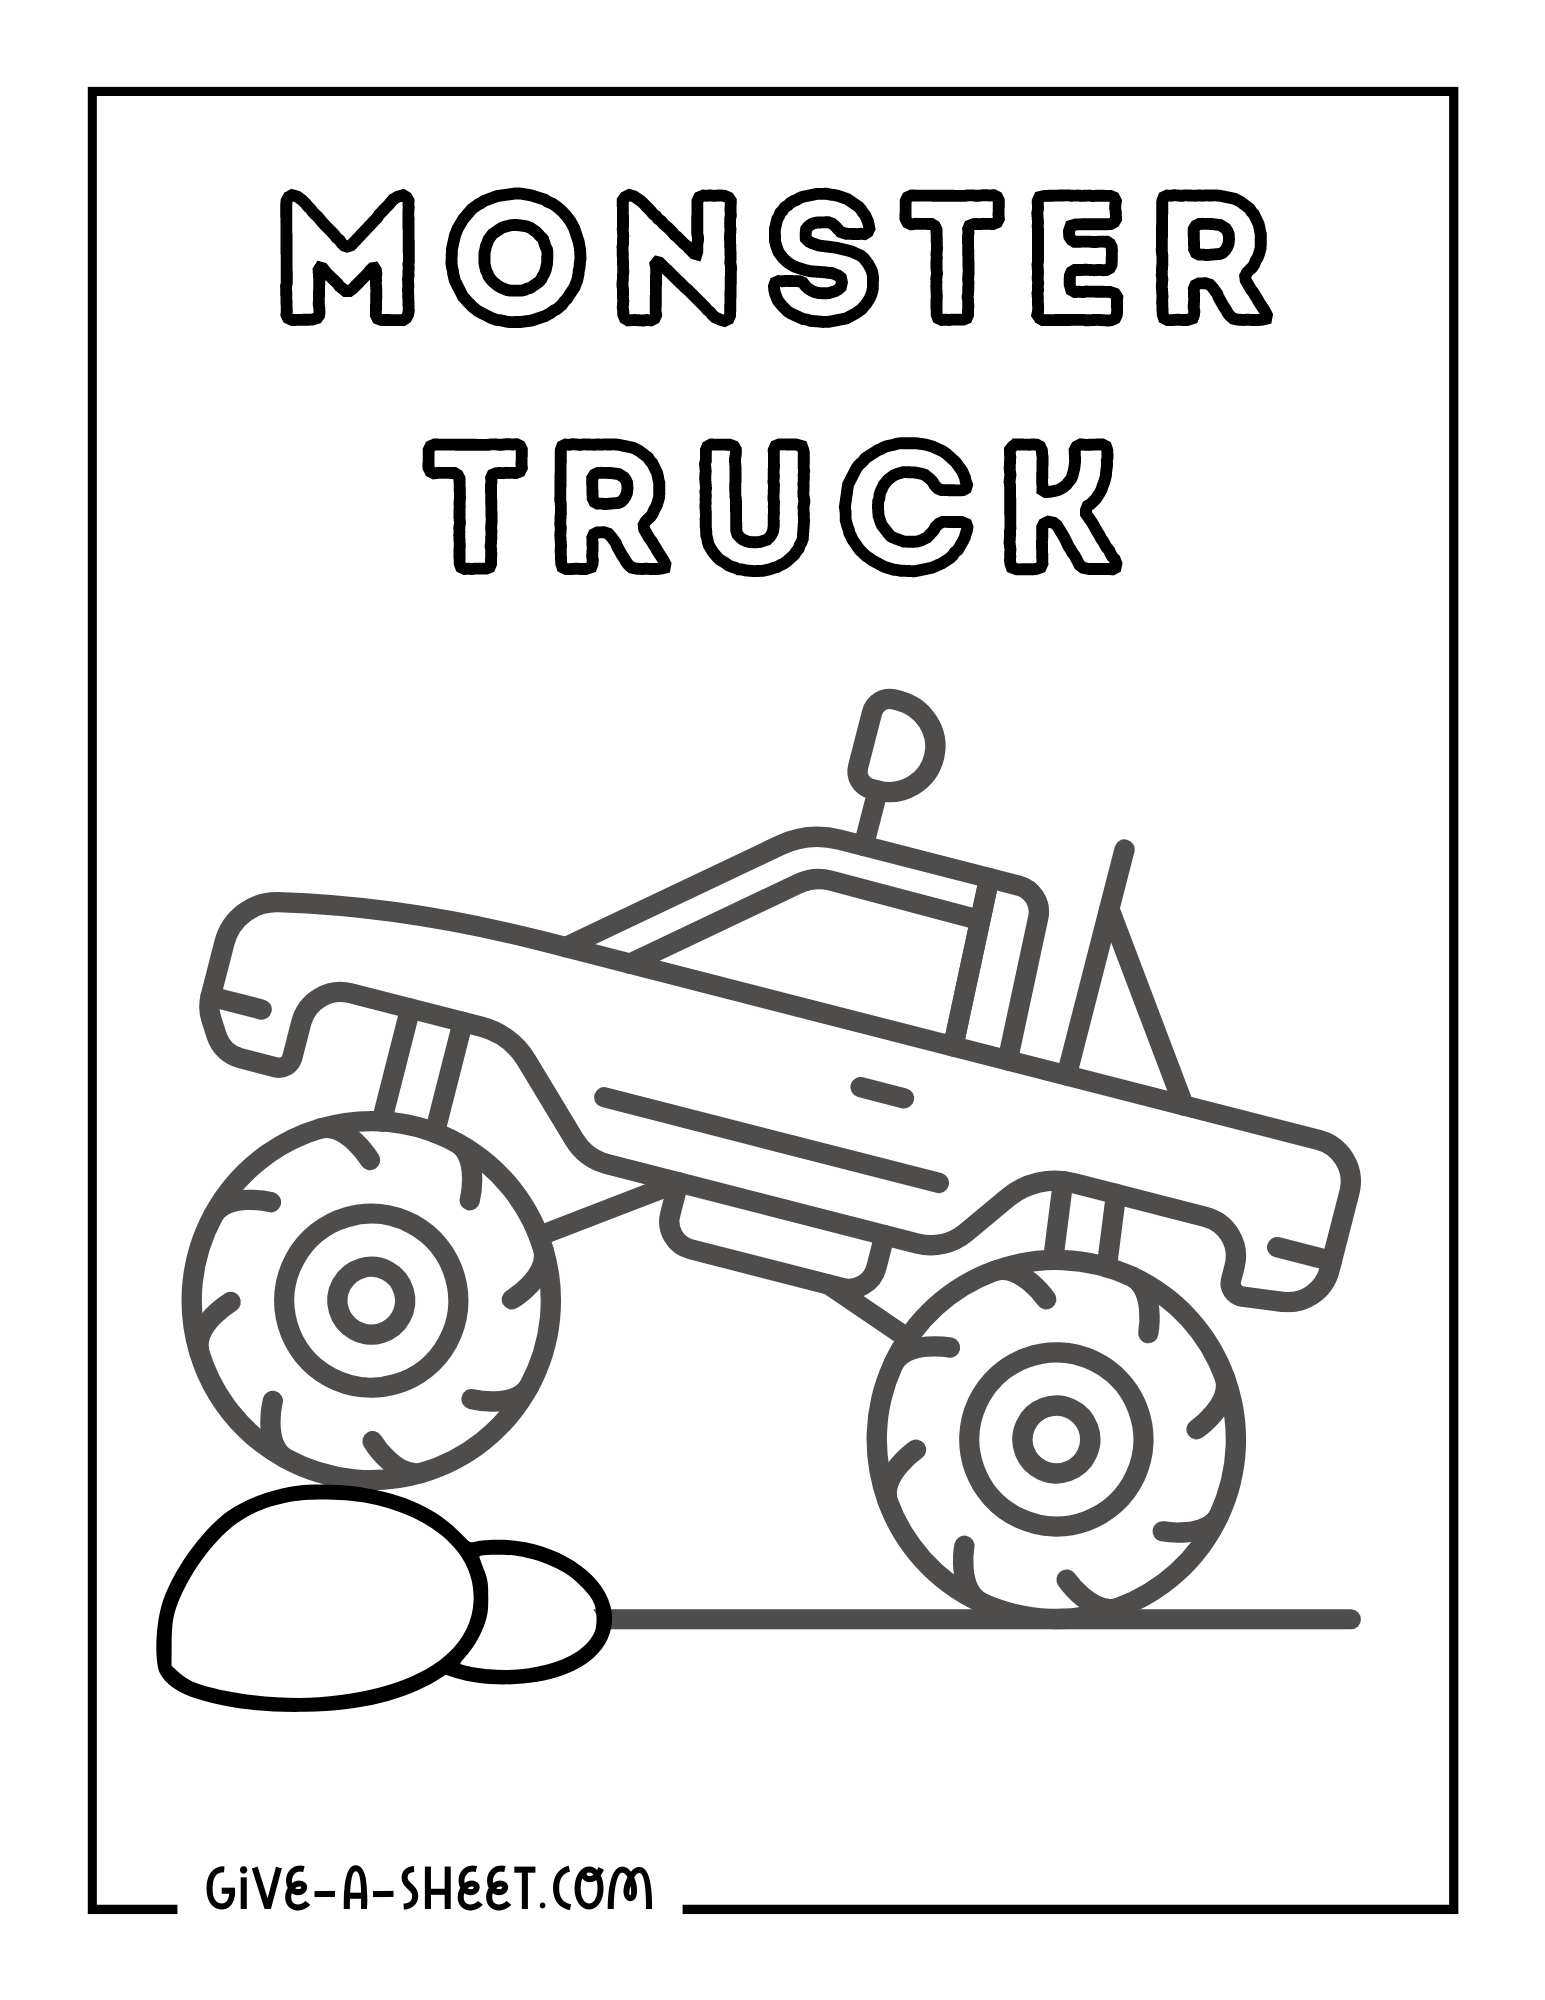 Monster truck coloring pages with huge wheels for kids.